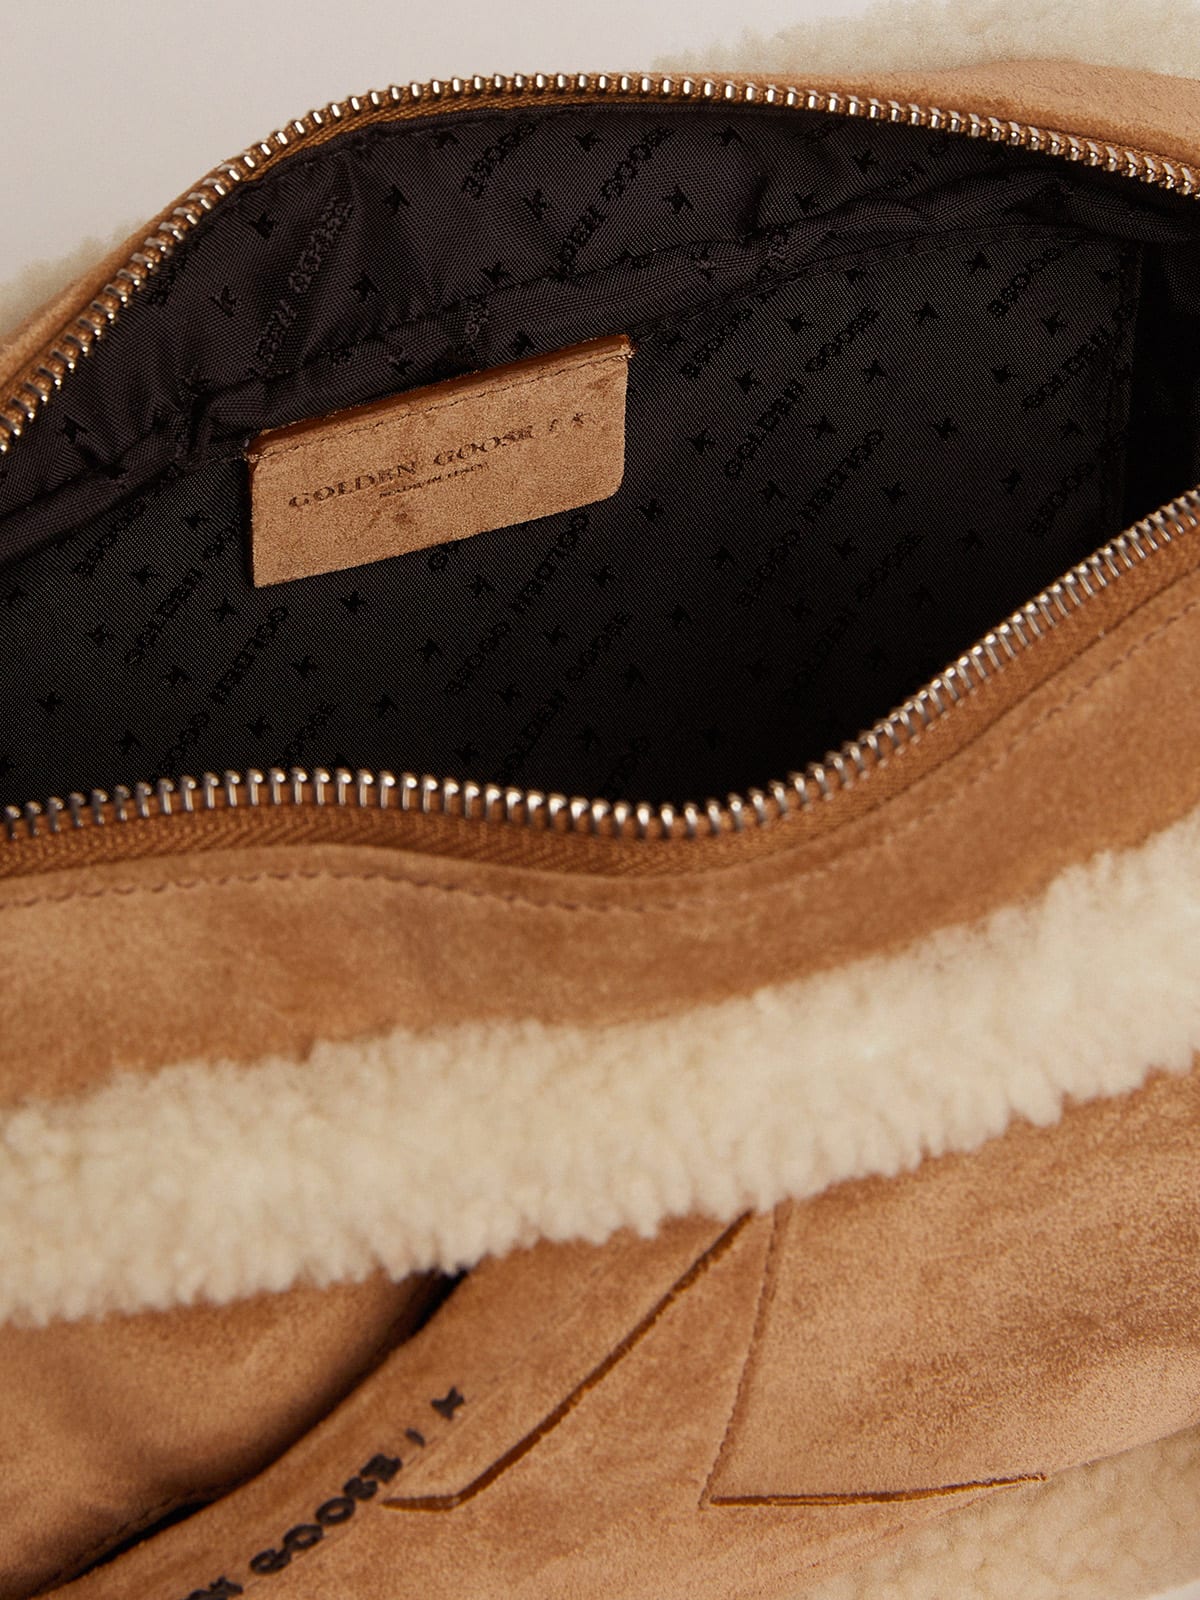 Golden Goose - Star Bag made of suede leather with shearling edging in 